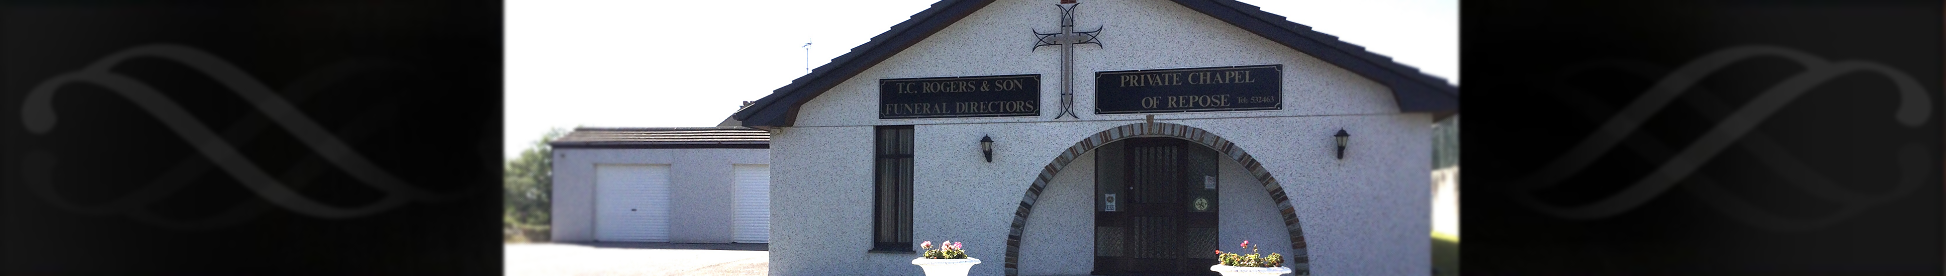 T.C. Rogers & Sons